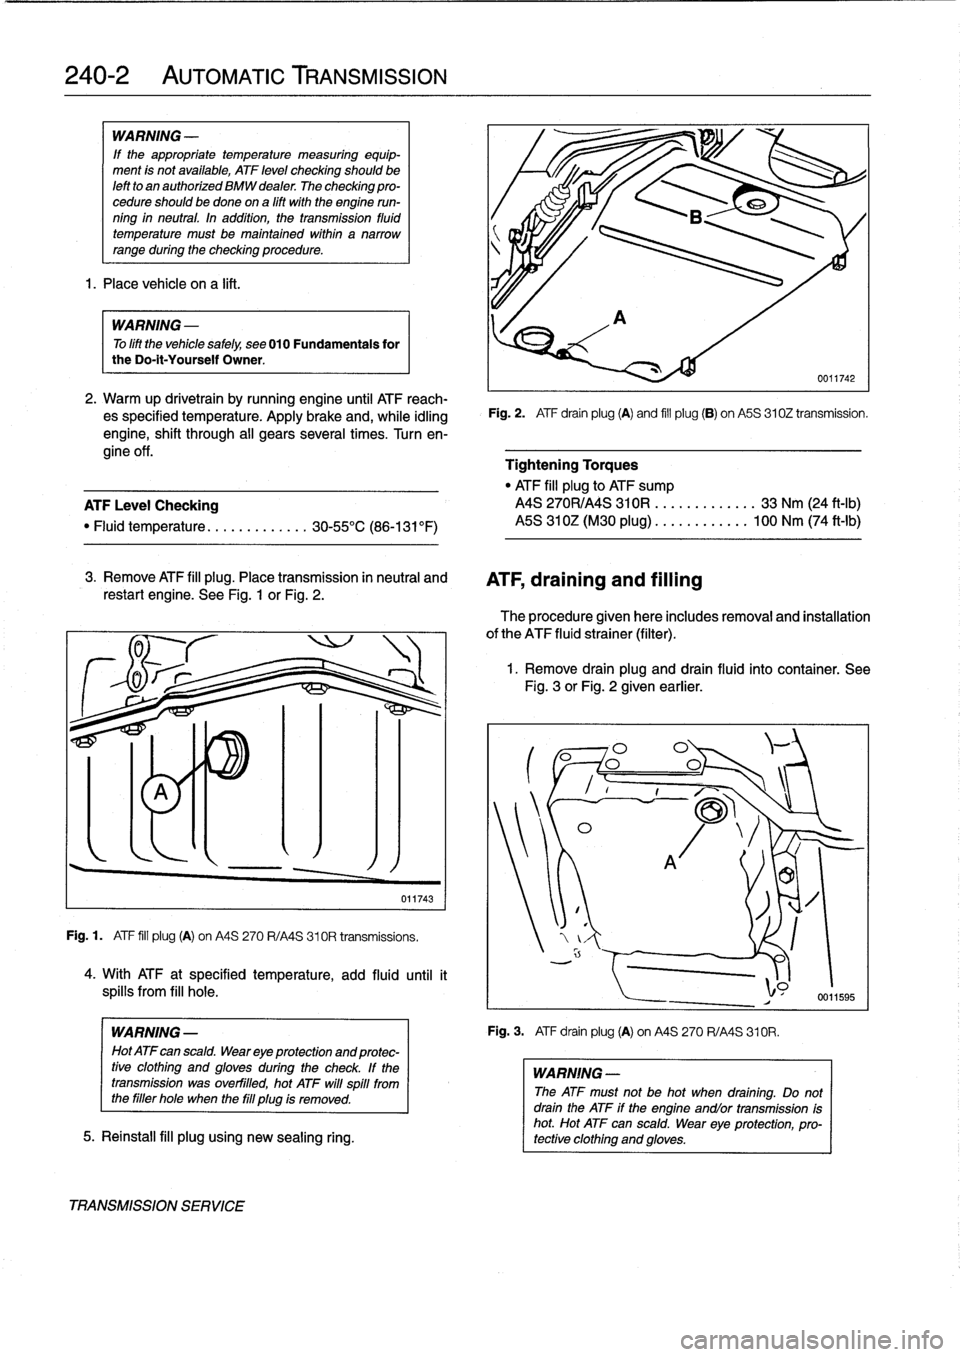 BMW 328i 1998 E36 Owners Manual 
240-2

	

AUTOMATIC
TRANSMISSION

WARNING
-

If
the
appropriate
temperature
measuring
equip-
ment
is
not
available,
ATF
leve¡
checking
shouldbe
left
to
an
authorized
BMW
dealer
The
checking
pro-
ced